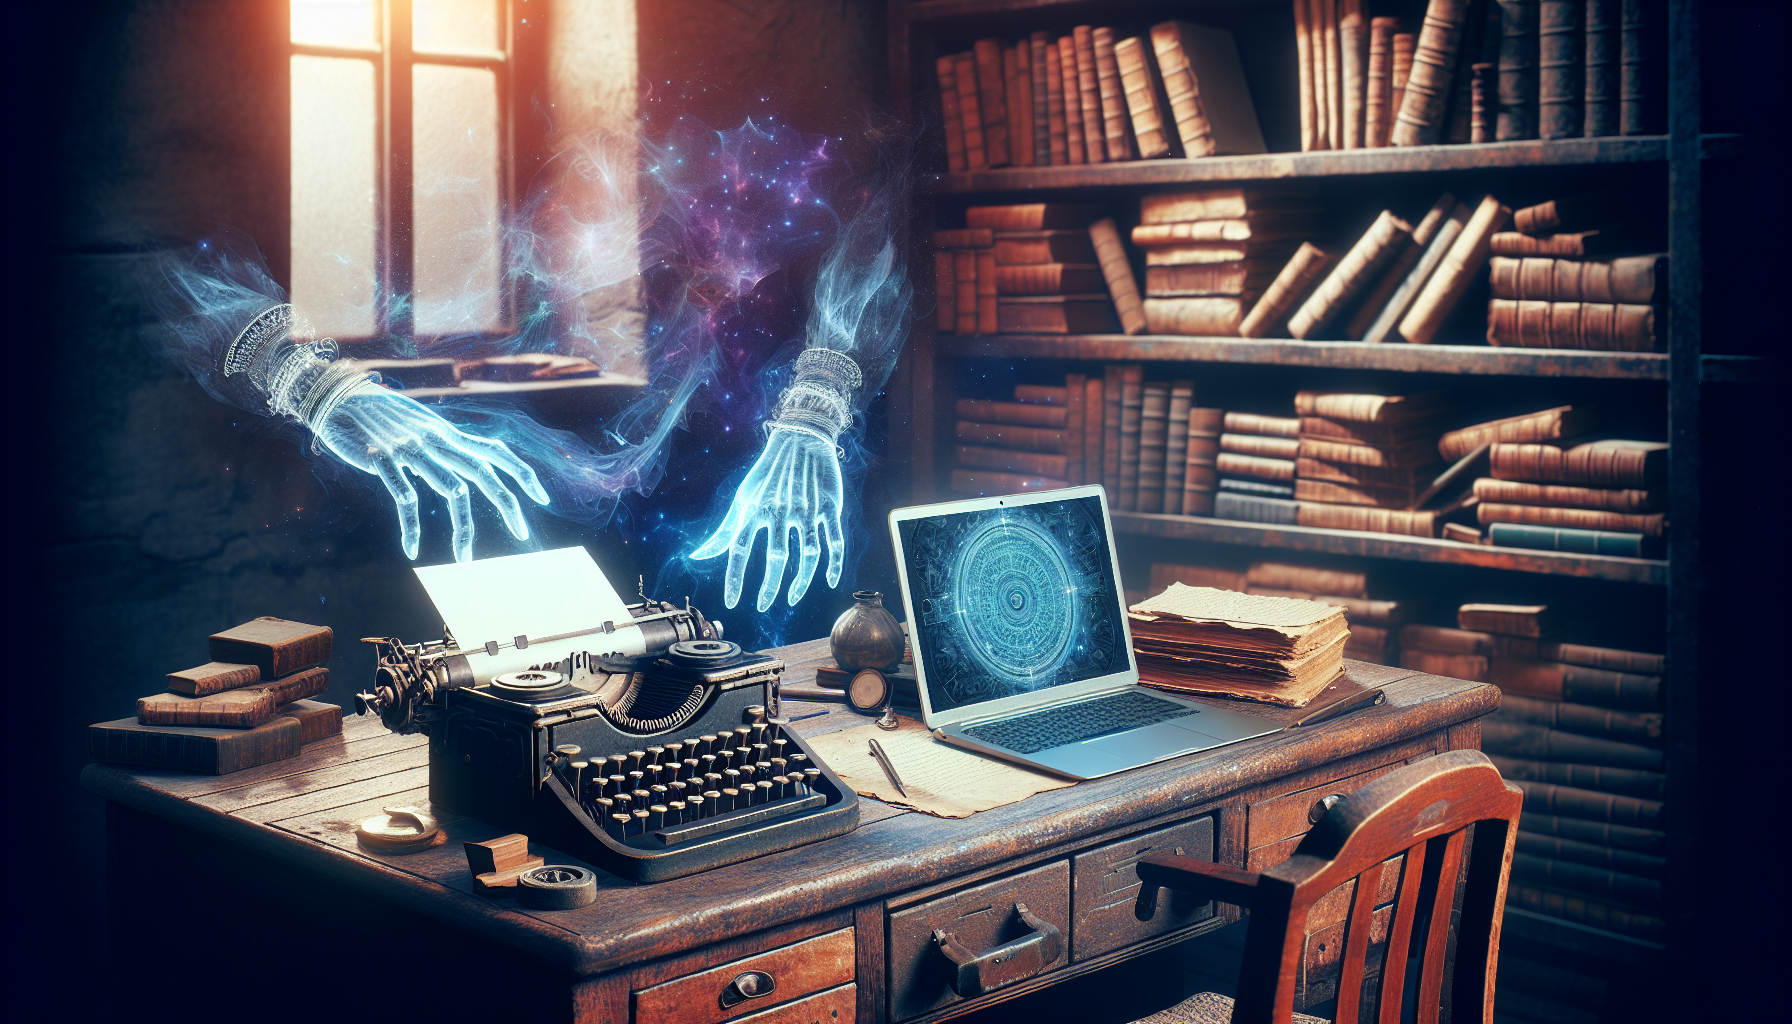 An antique typewriter and a modern laptop side by side on an old wooden desk, as ghostly holographic hands type on both, in a dimly lit room filled with books and scripts, evoking a mystical fusion of